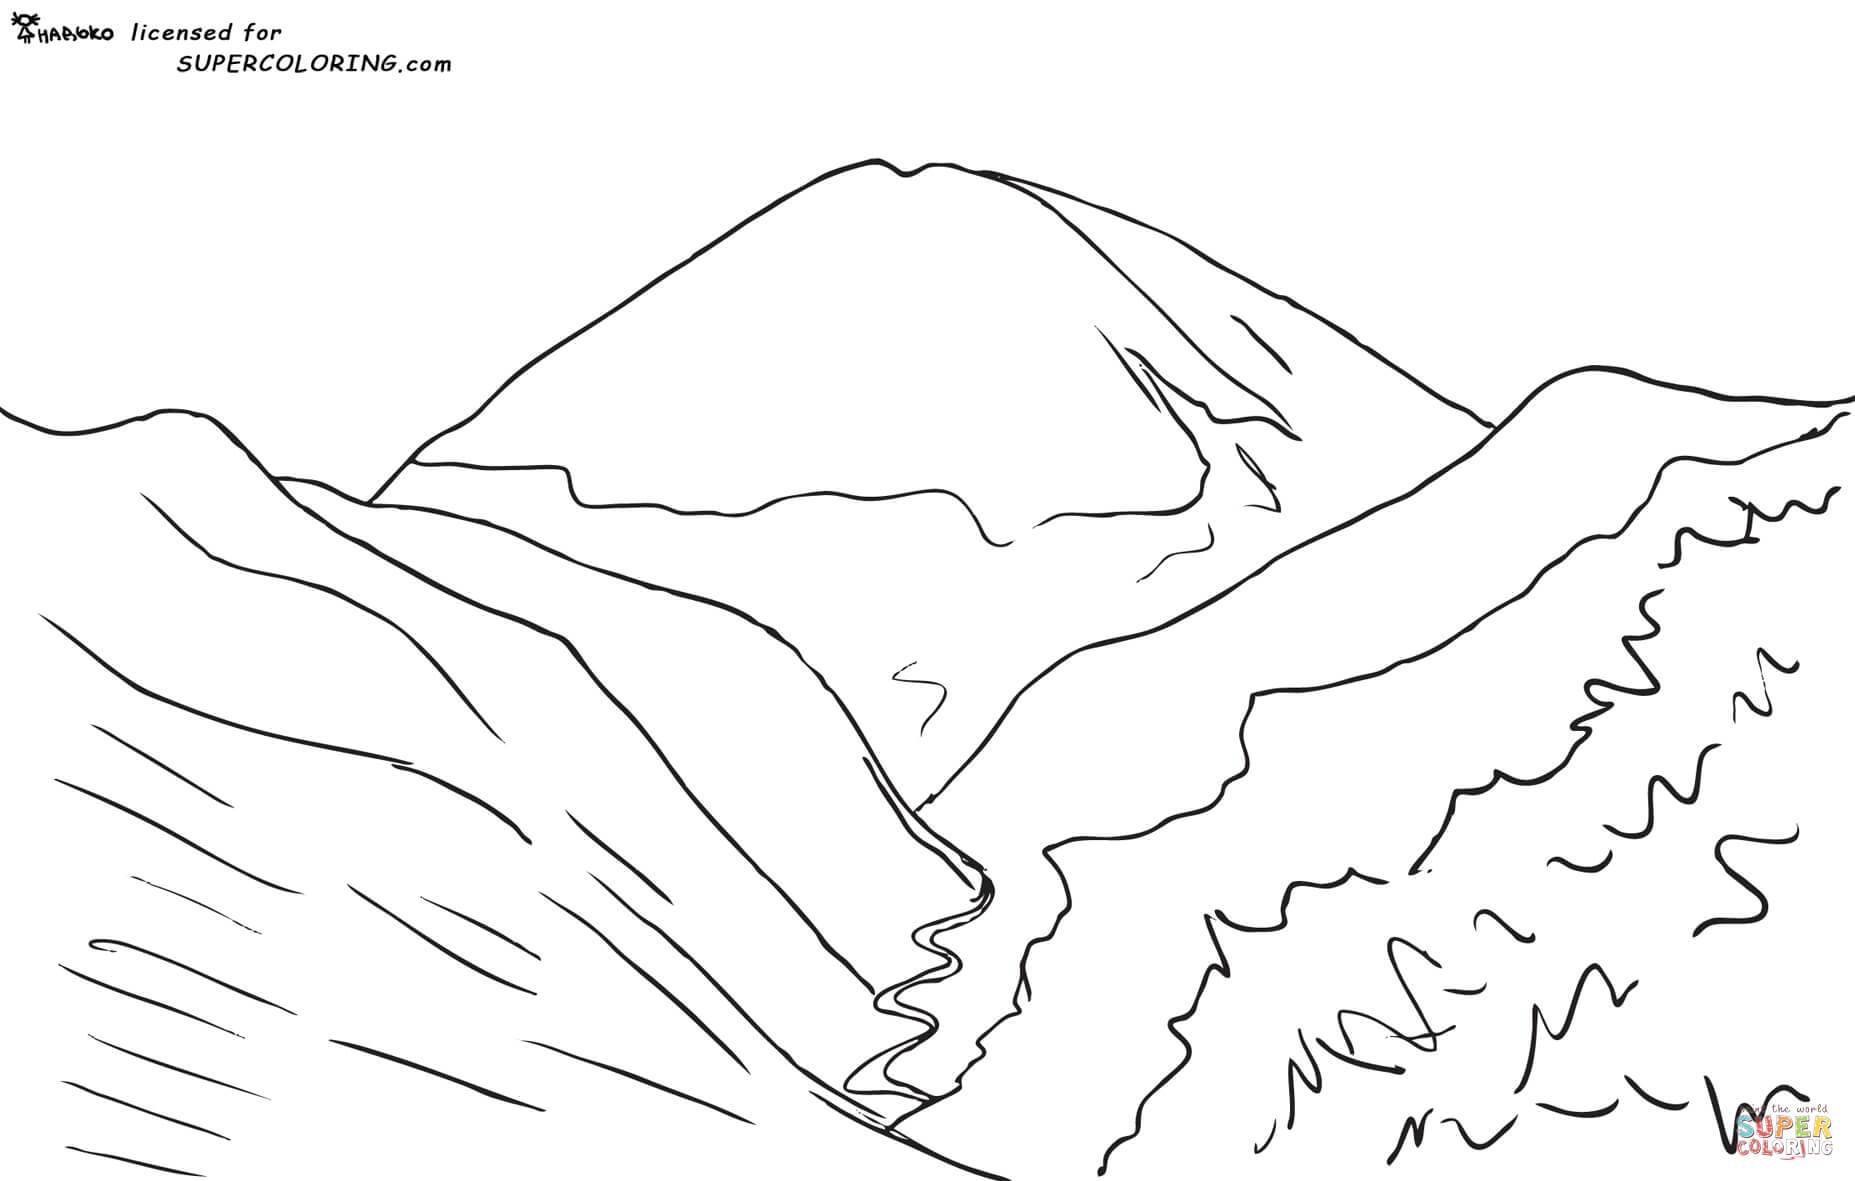 Elbrus Moonlight By Arkhip Ivanovich Kuindzhi coloring page